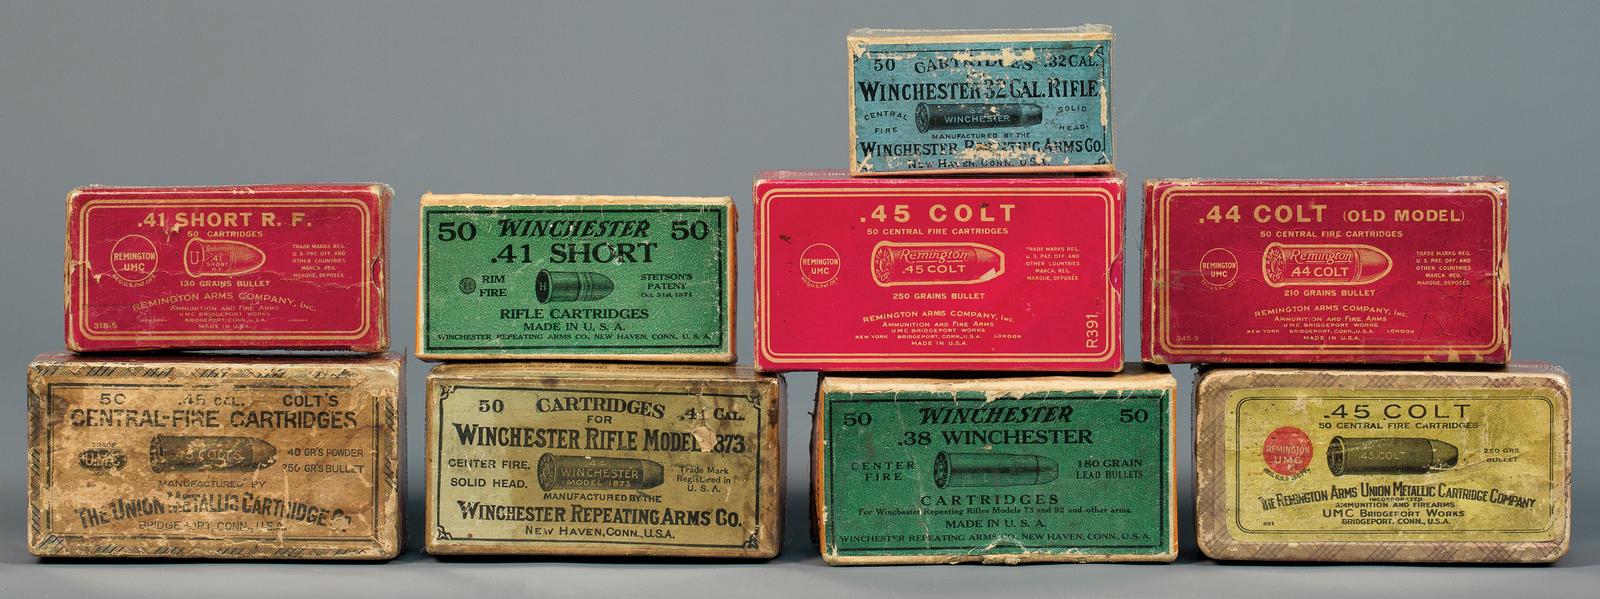 Collecting Vintage Antique Ammo - Winchester Western Cartridge Co 